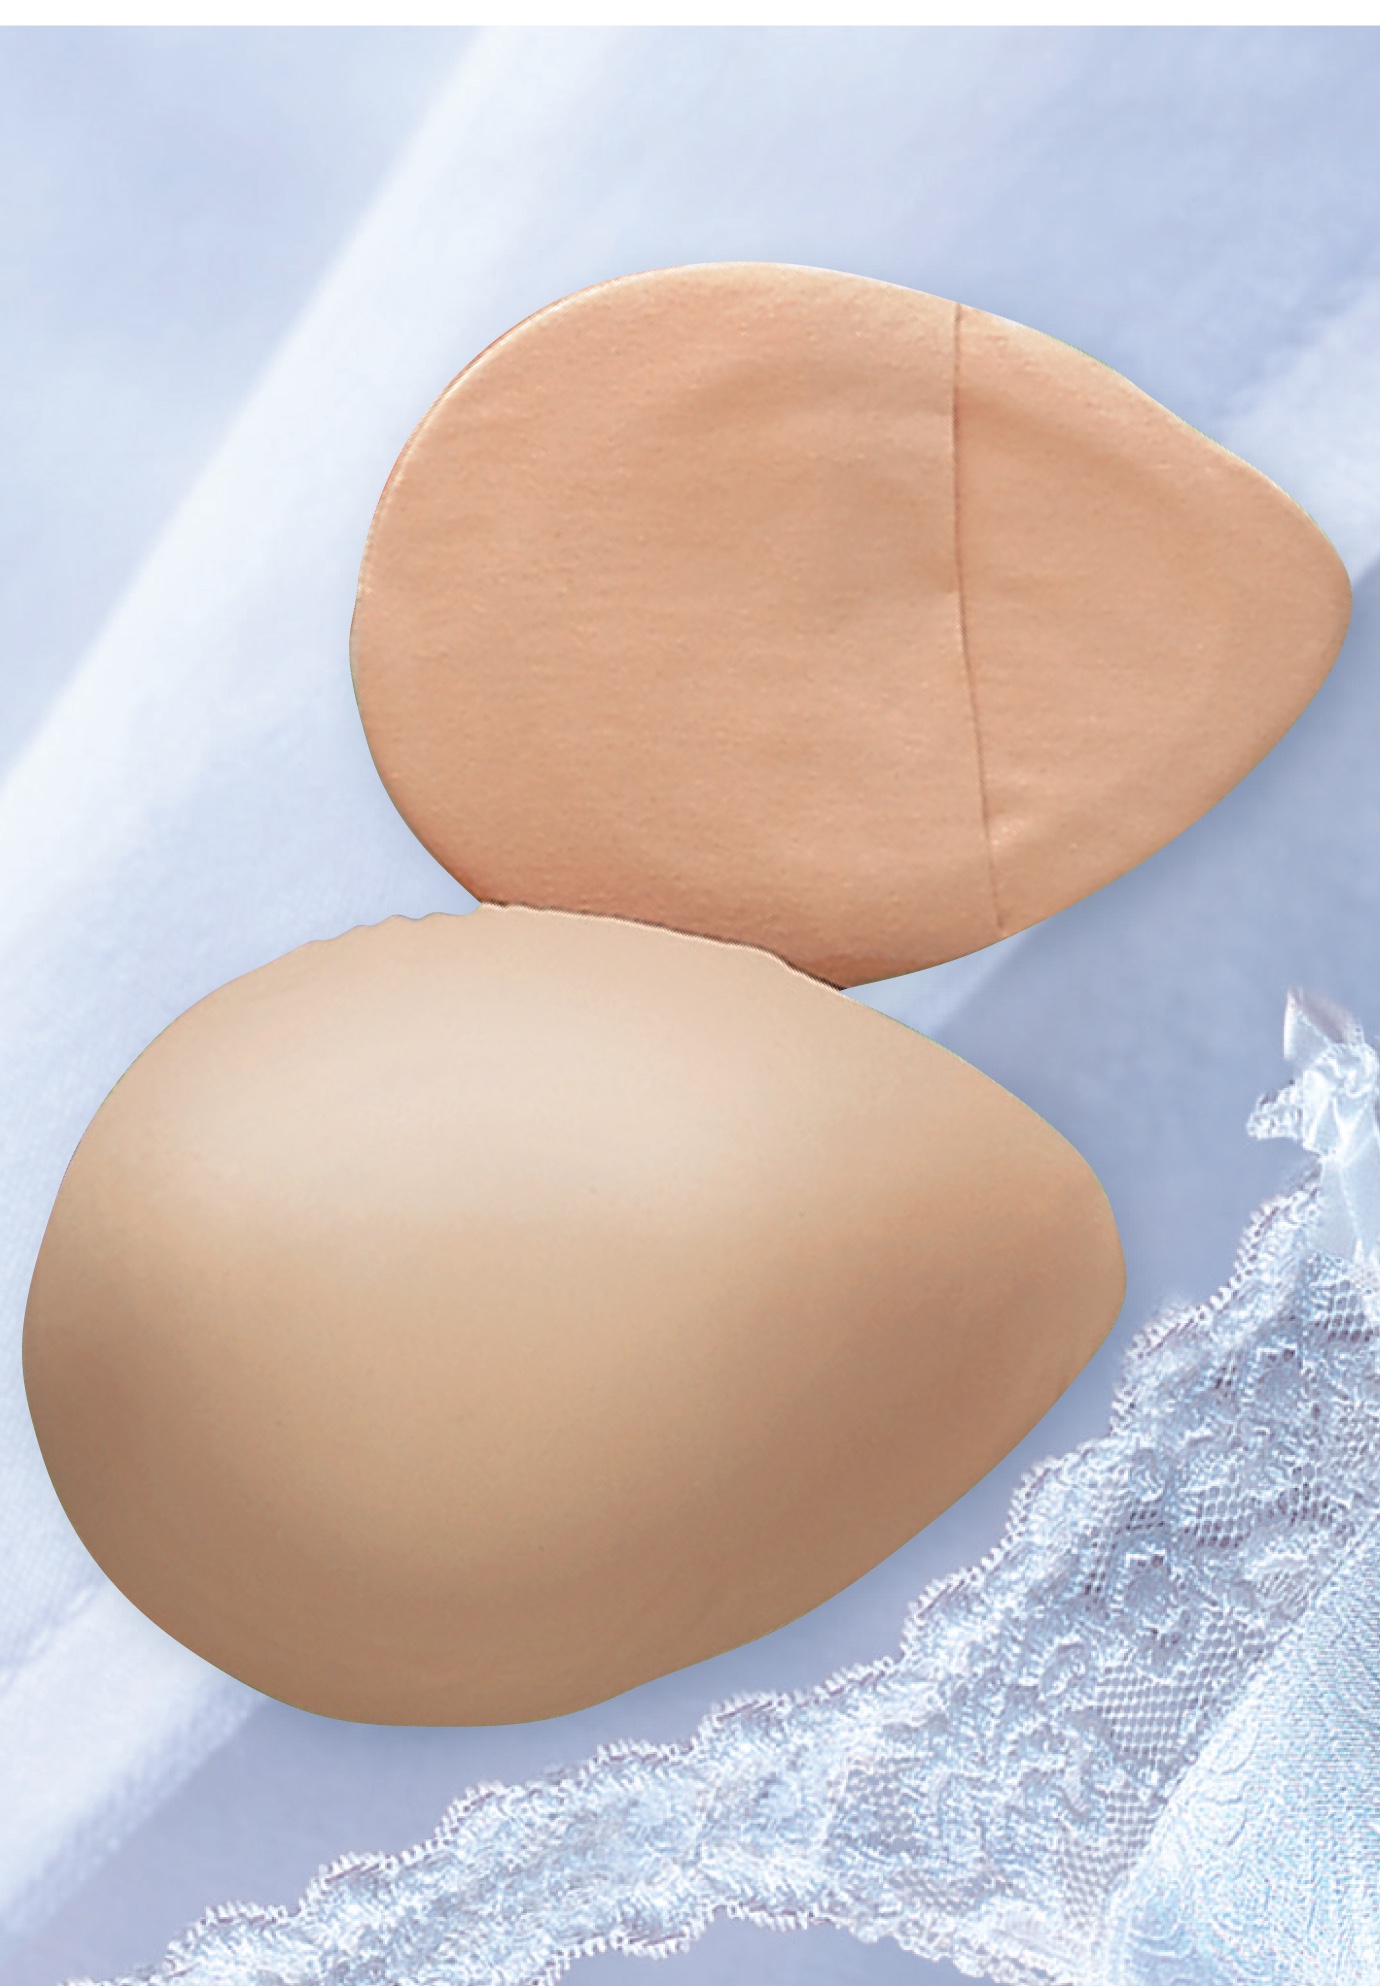 How To Make Breast Forms Look Real